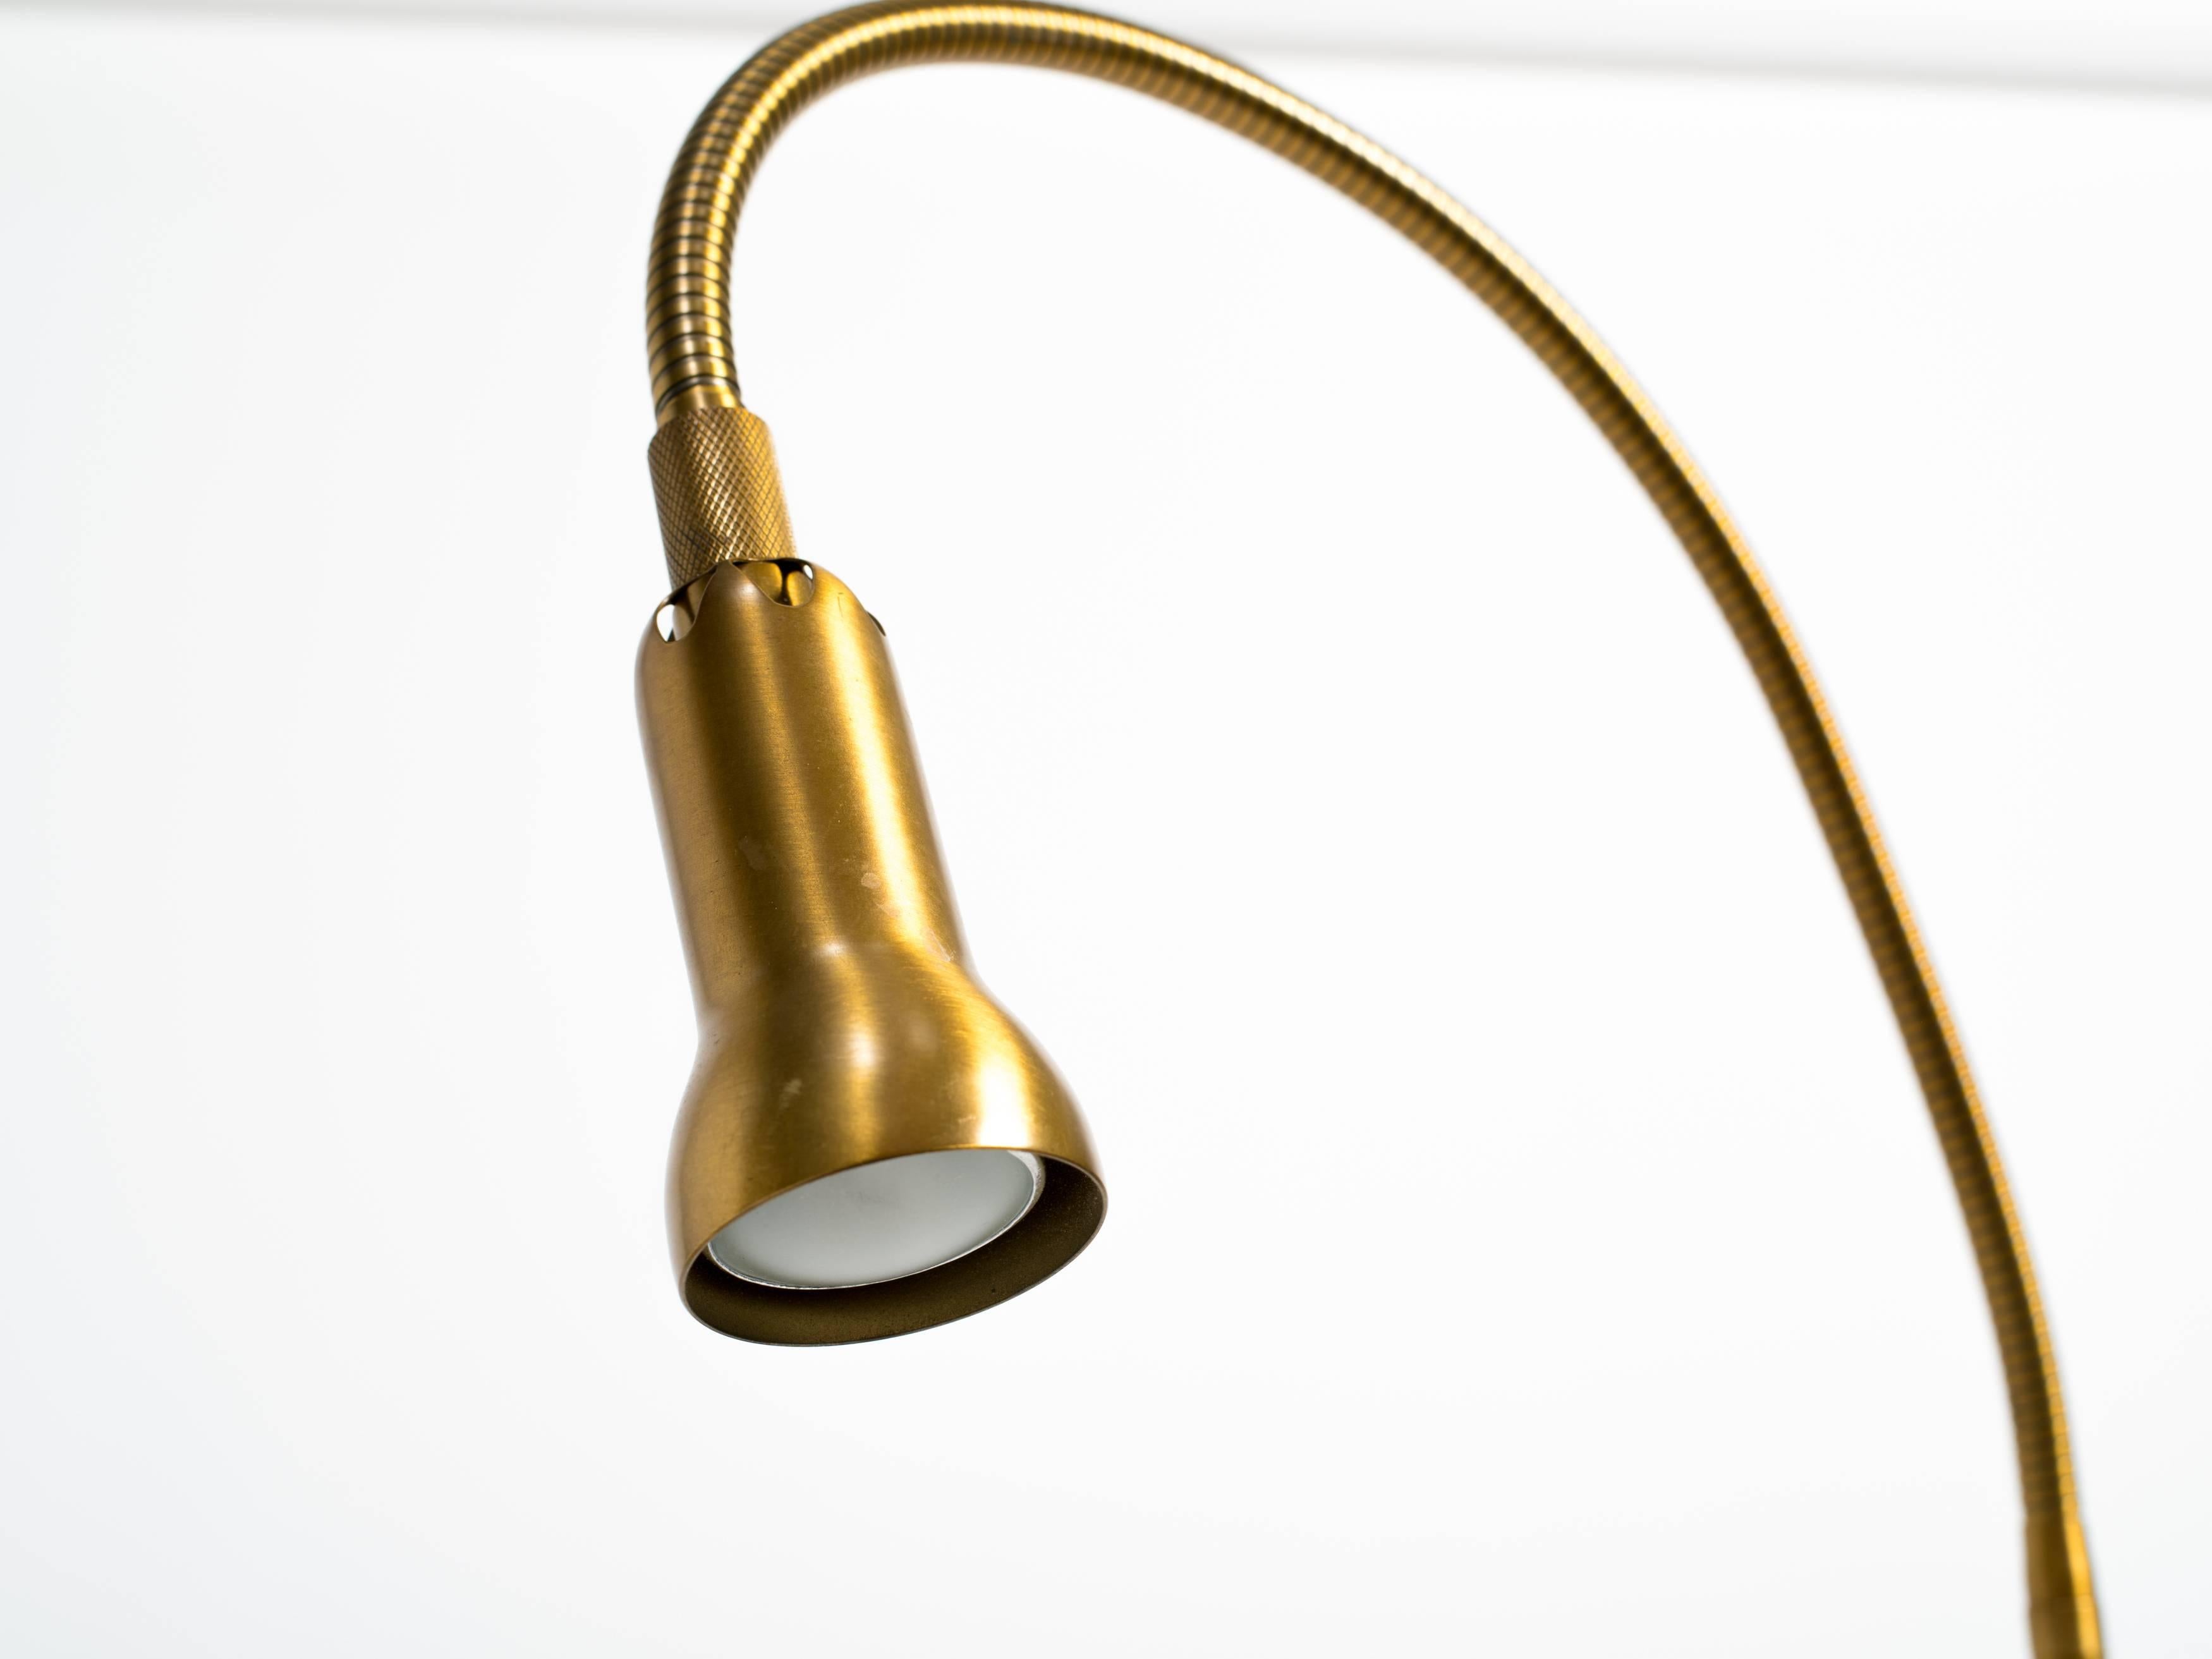 Brass gooseneck floor lamp. It has a dimmer on/off switch and adjustable spot light.